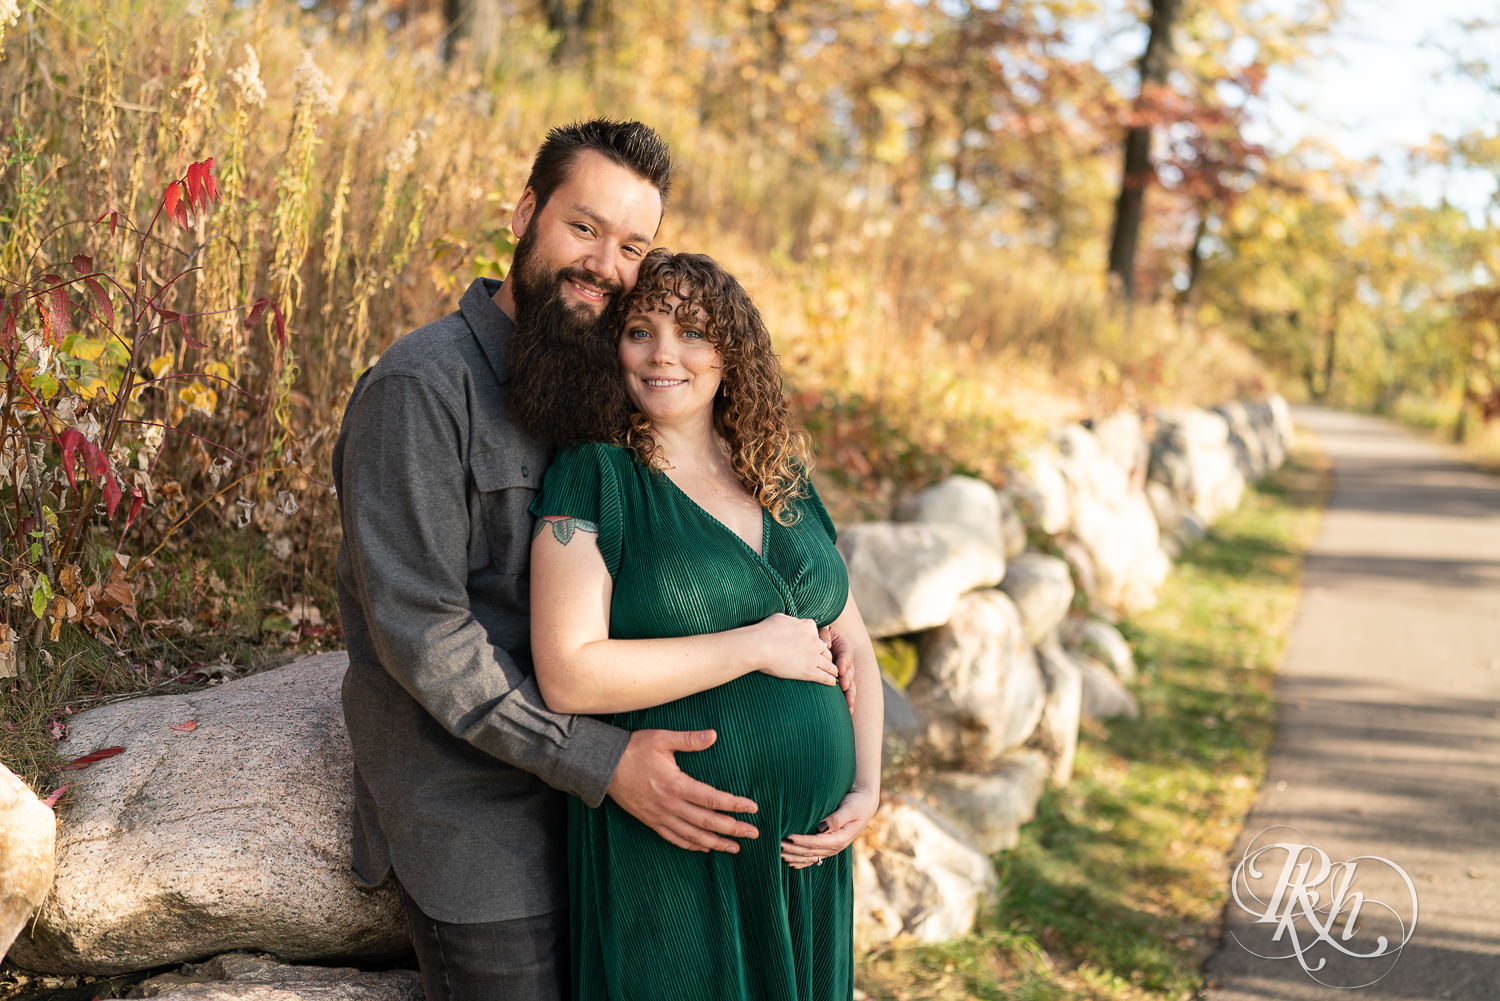 Pregnant woman in green dress and man hold belly and smile in Lebanon Hills Regional Park in Eagan, Minnesota.